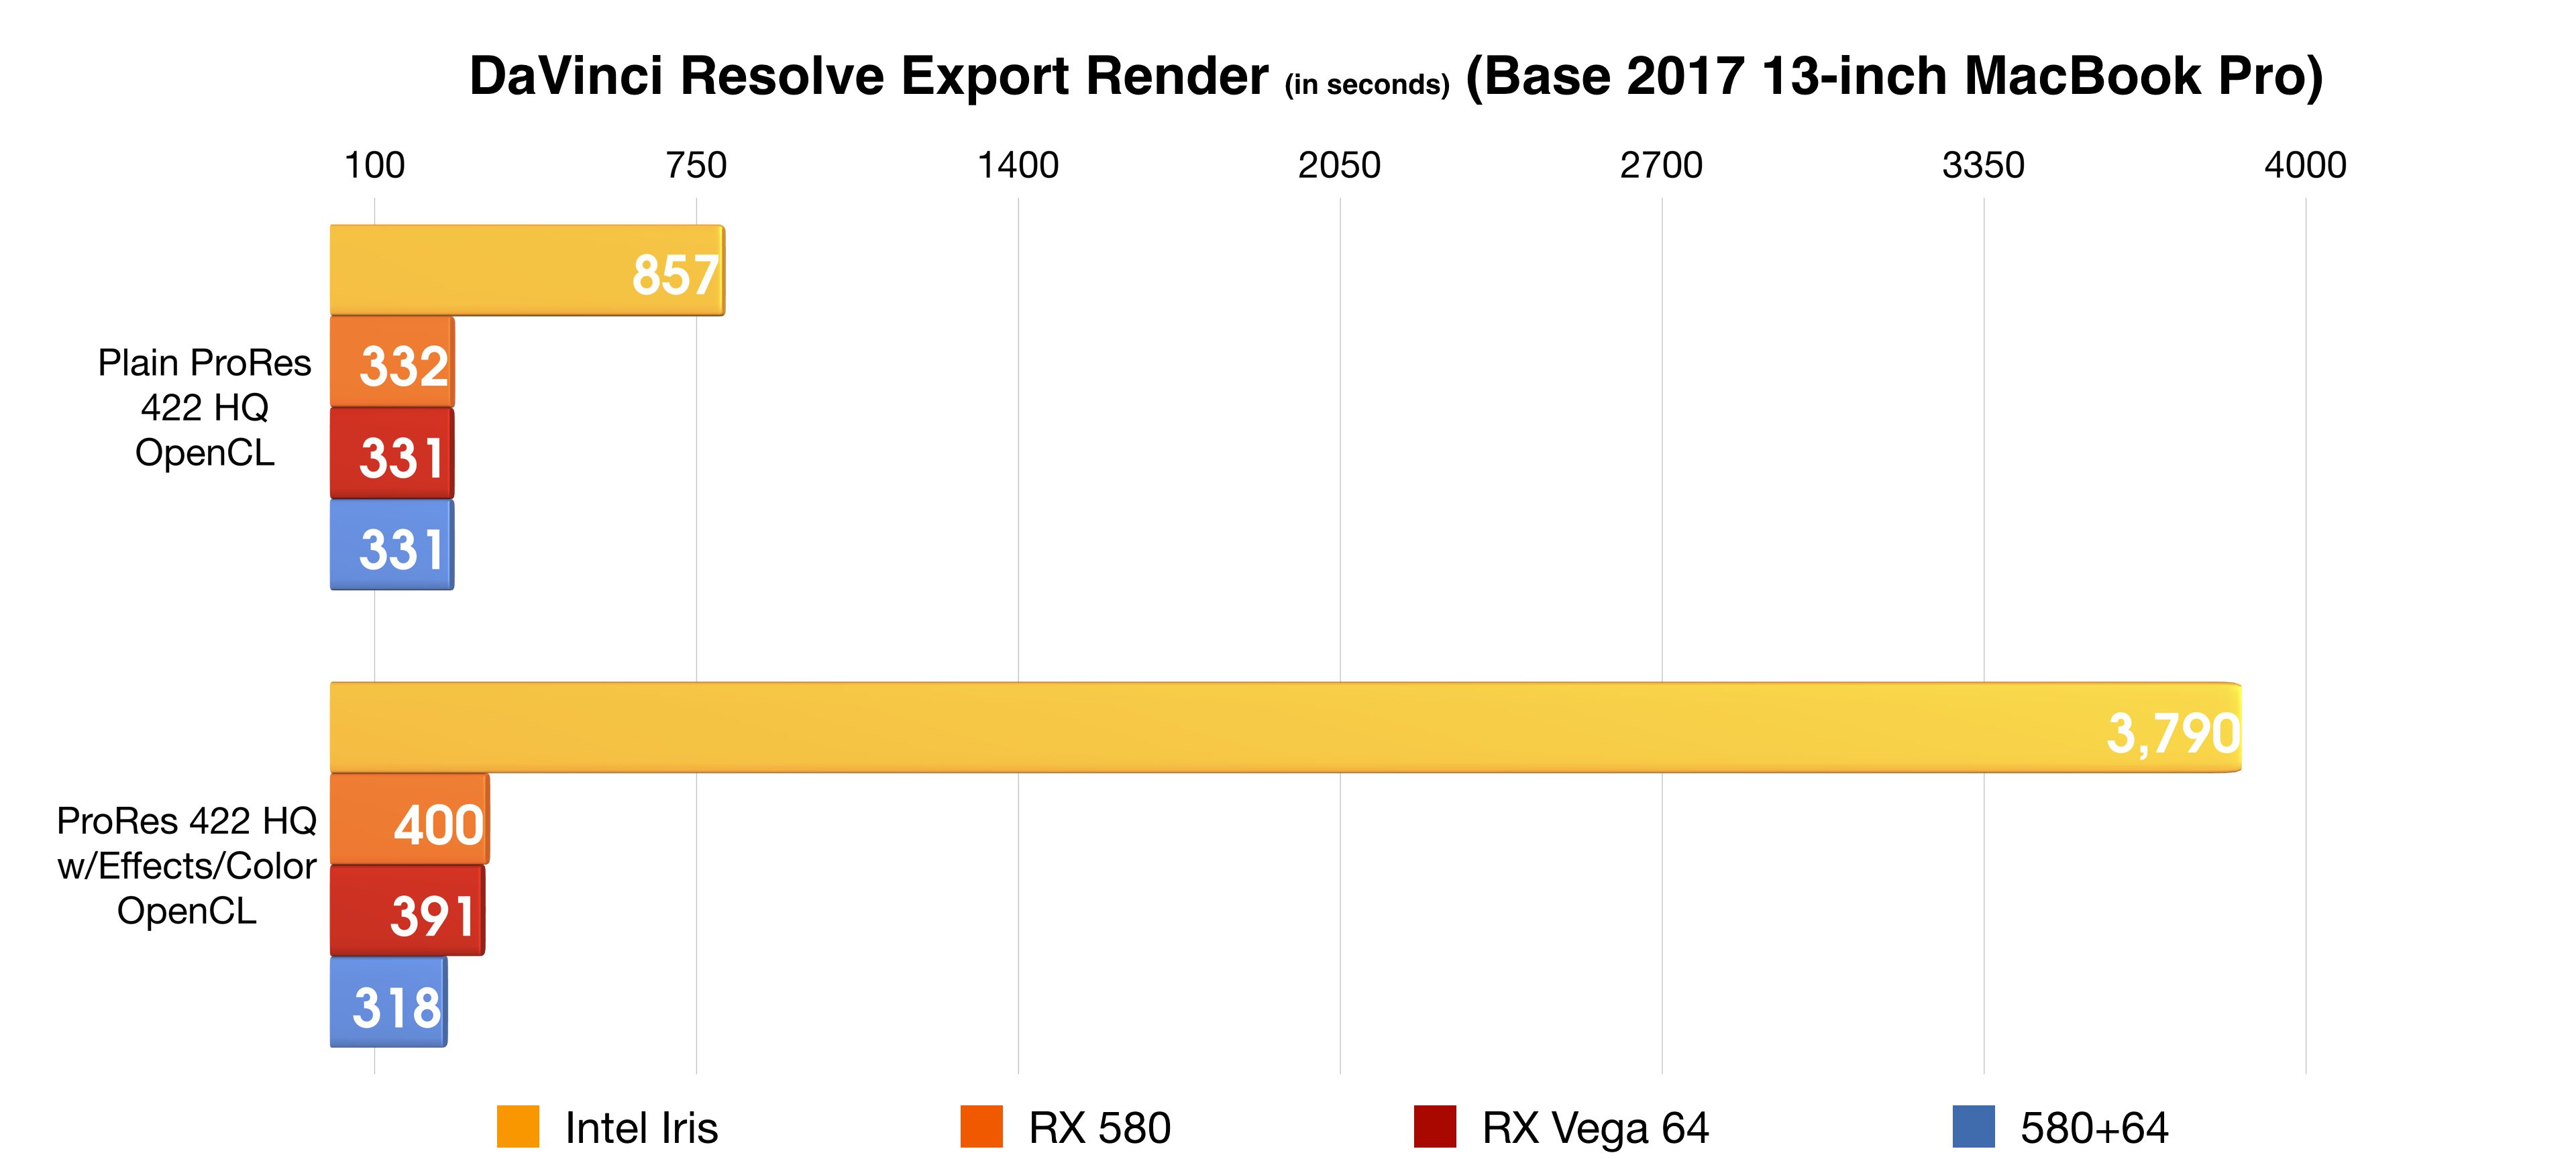 erfaring Ren Sightseeing Hands-on: DaVinci Resolve's eGPU-accelerated timeline performance and  exports totally crush integrated GPU results [Video] - 9to5Mac